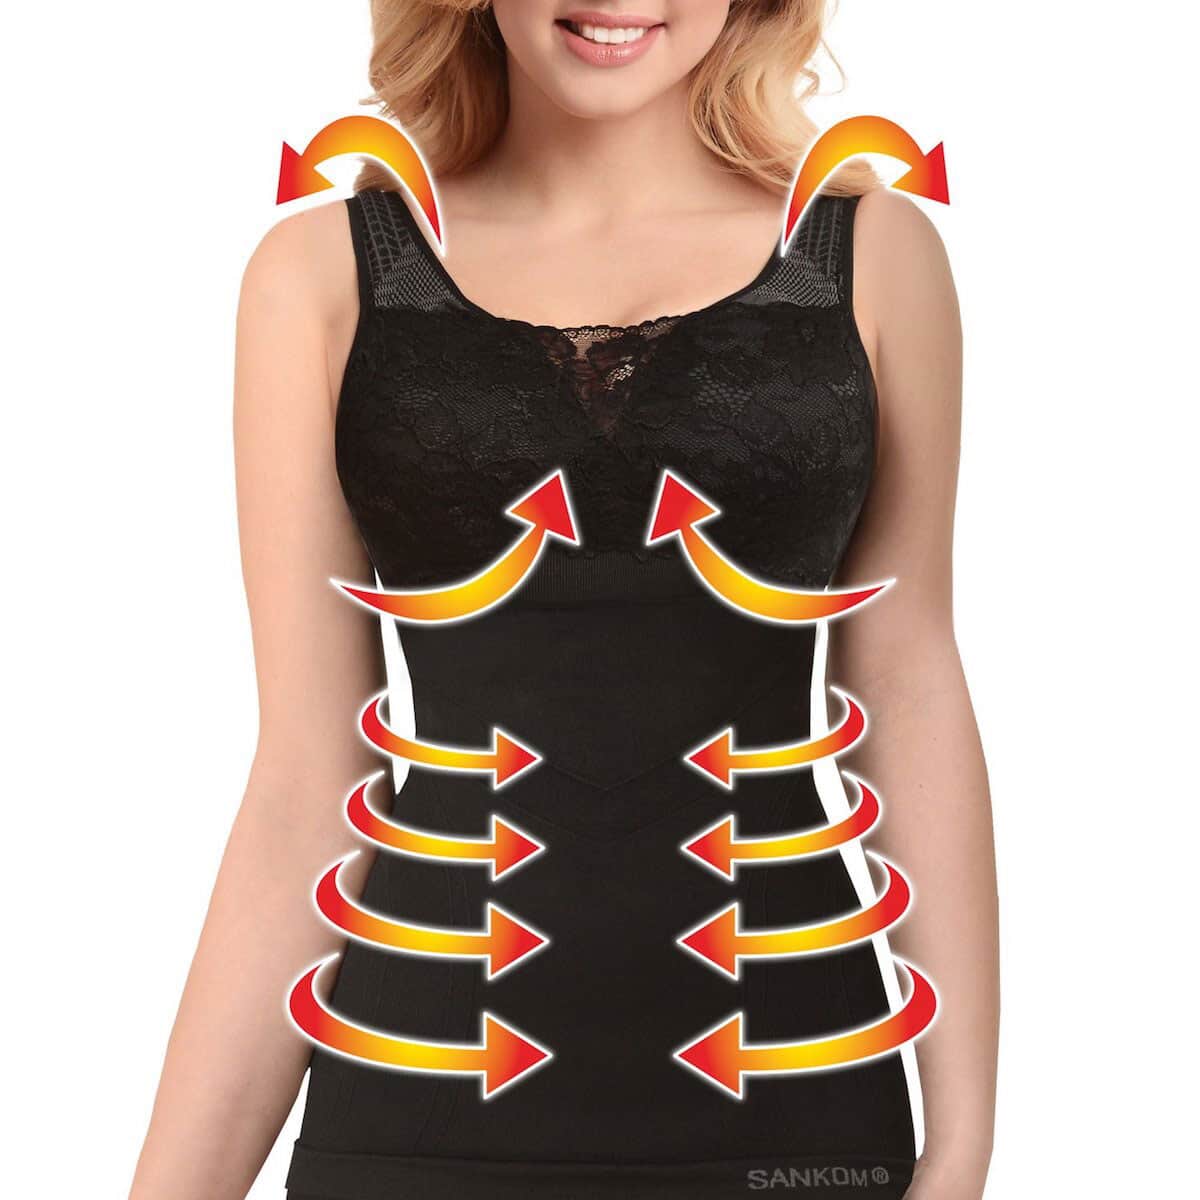 Buy SANKOM Patent Set of 2 Classic Body Shaping Padded Camisole with  Built-in Bra (S/M, Black & Beige) at ShopLC.